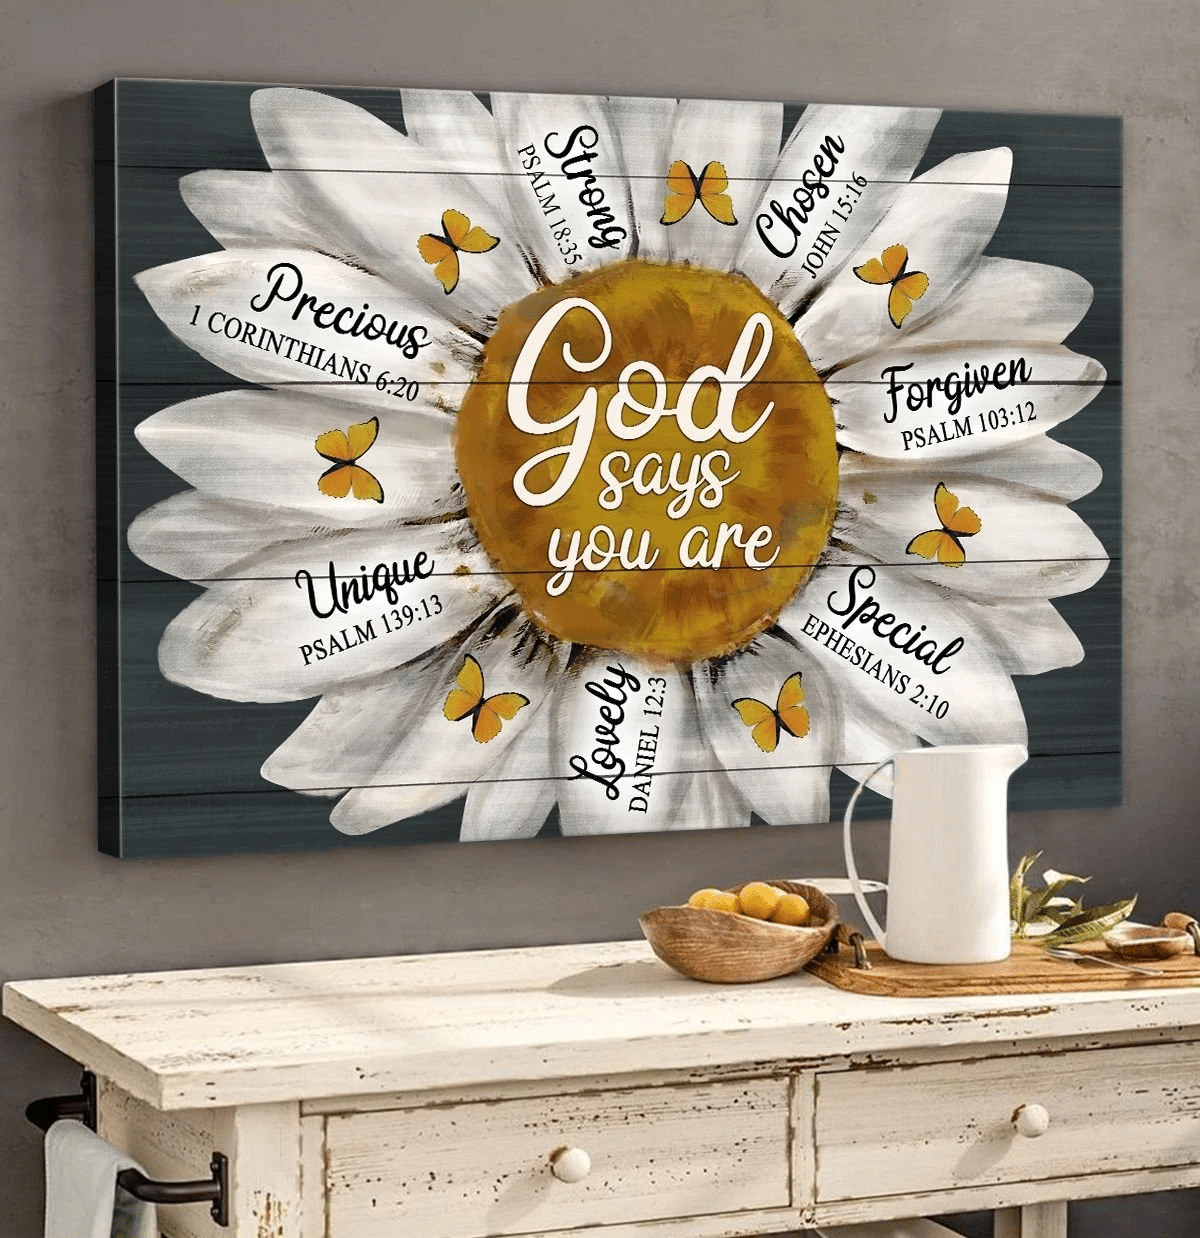 Daisy - God Says You Are With Butterfly Lanscape Poster & Canvas Gift For Friend Family Home Decor Wall Art Visual Art